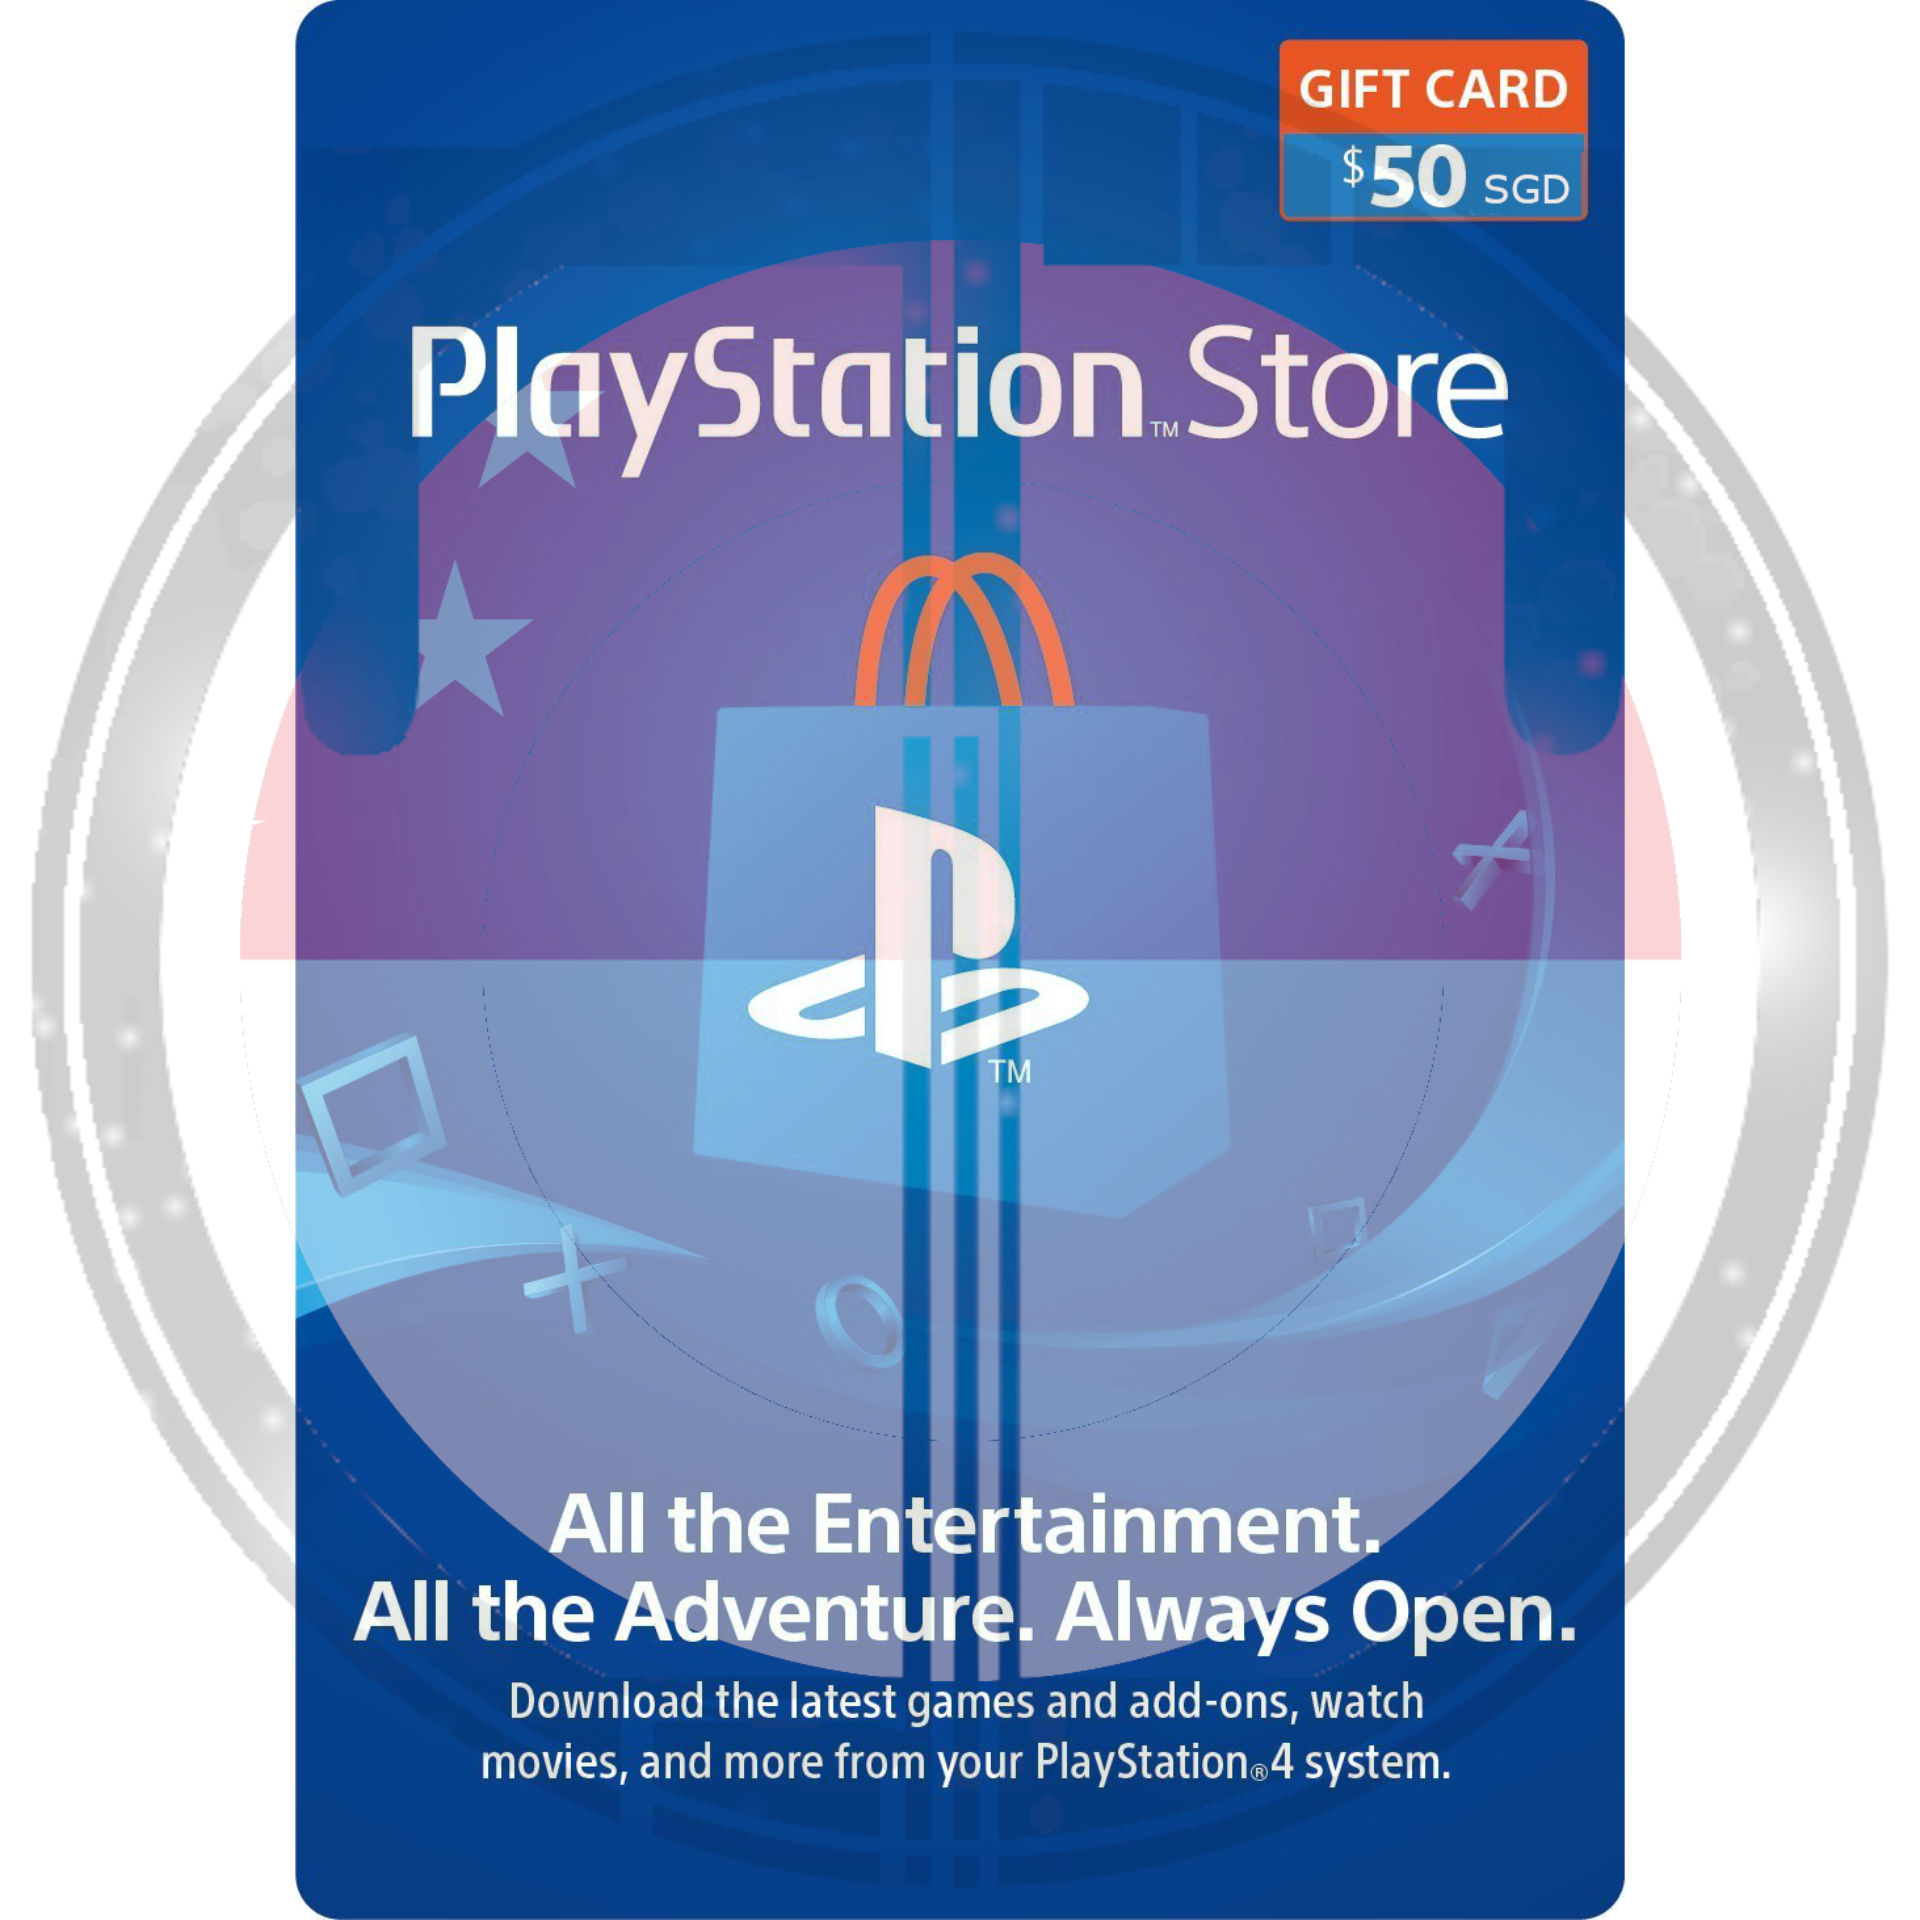 playstation store online